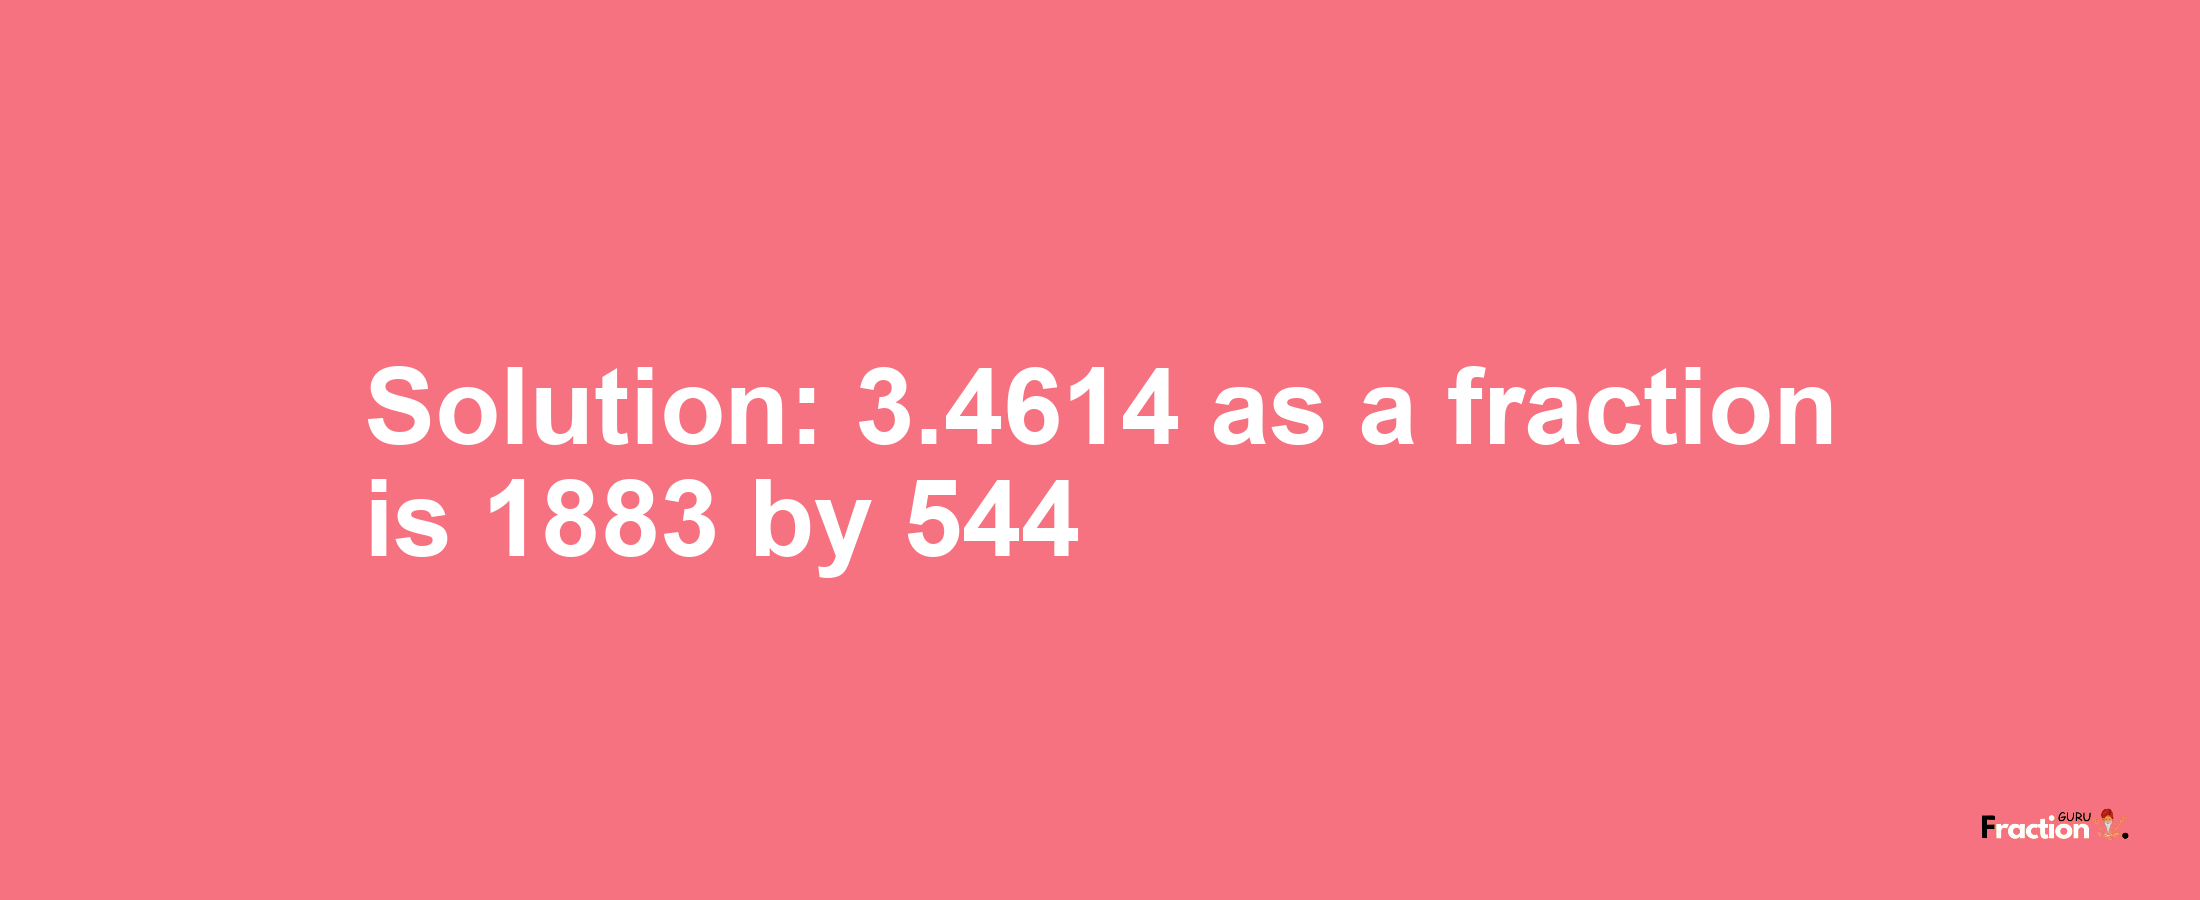 Solution:3.4614 as a fraction is 1883/544